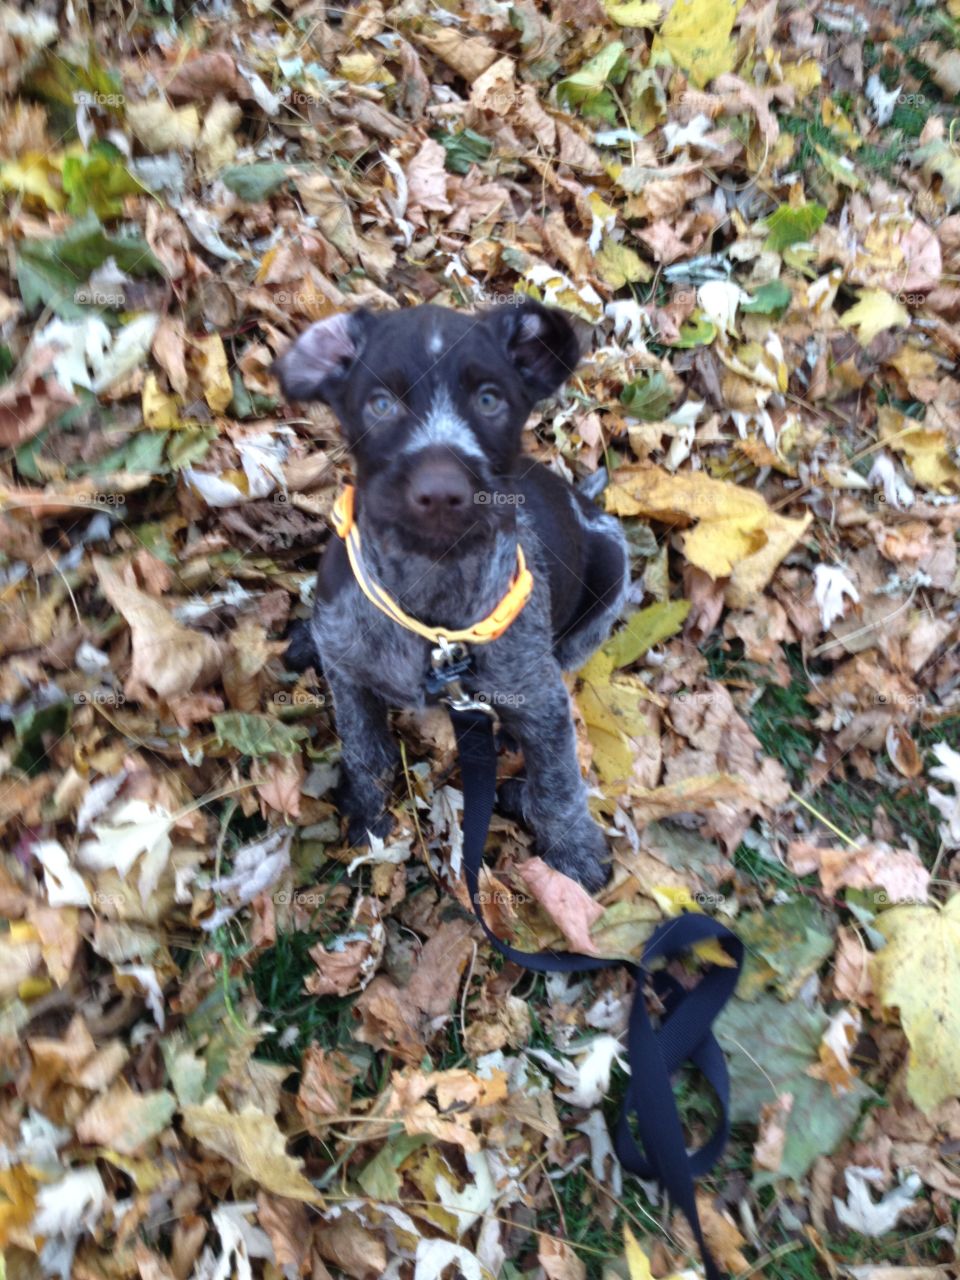 Bart. Puppy playing in fall leaves.
